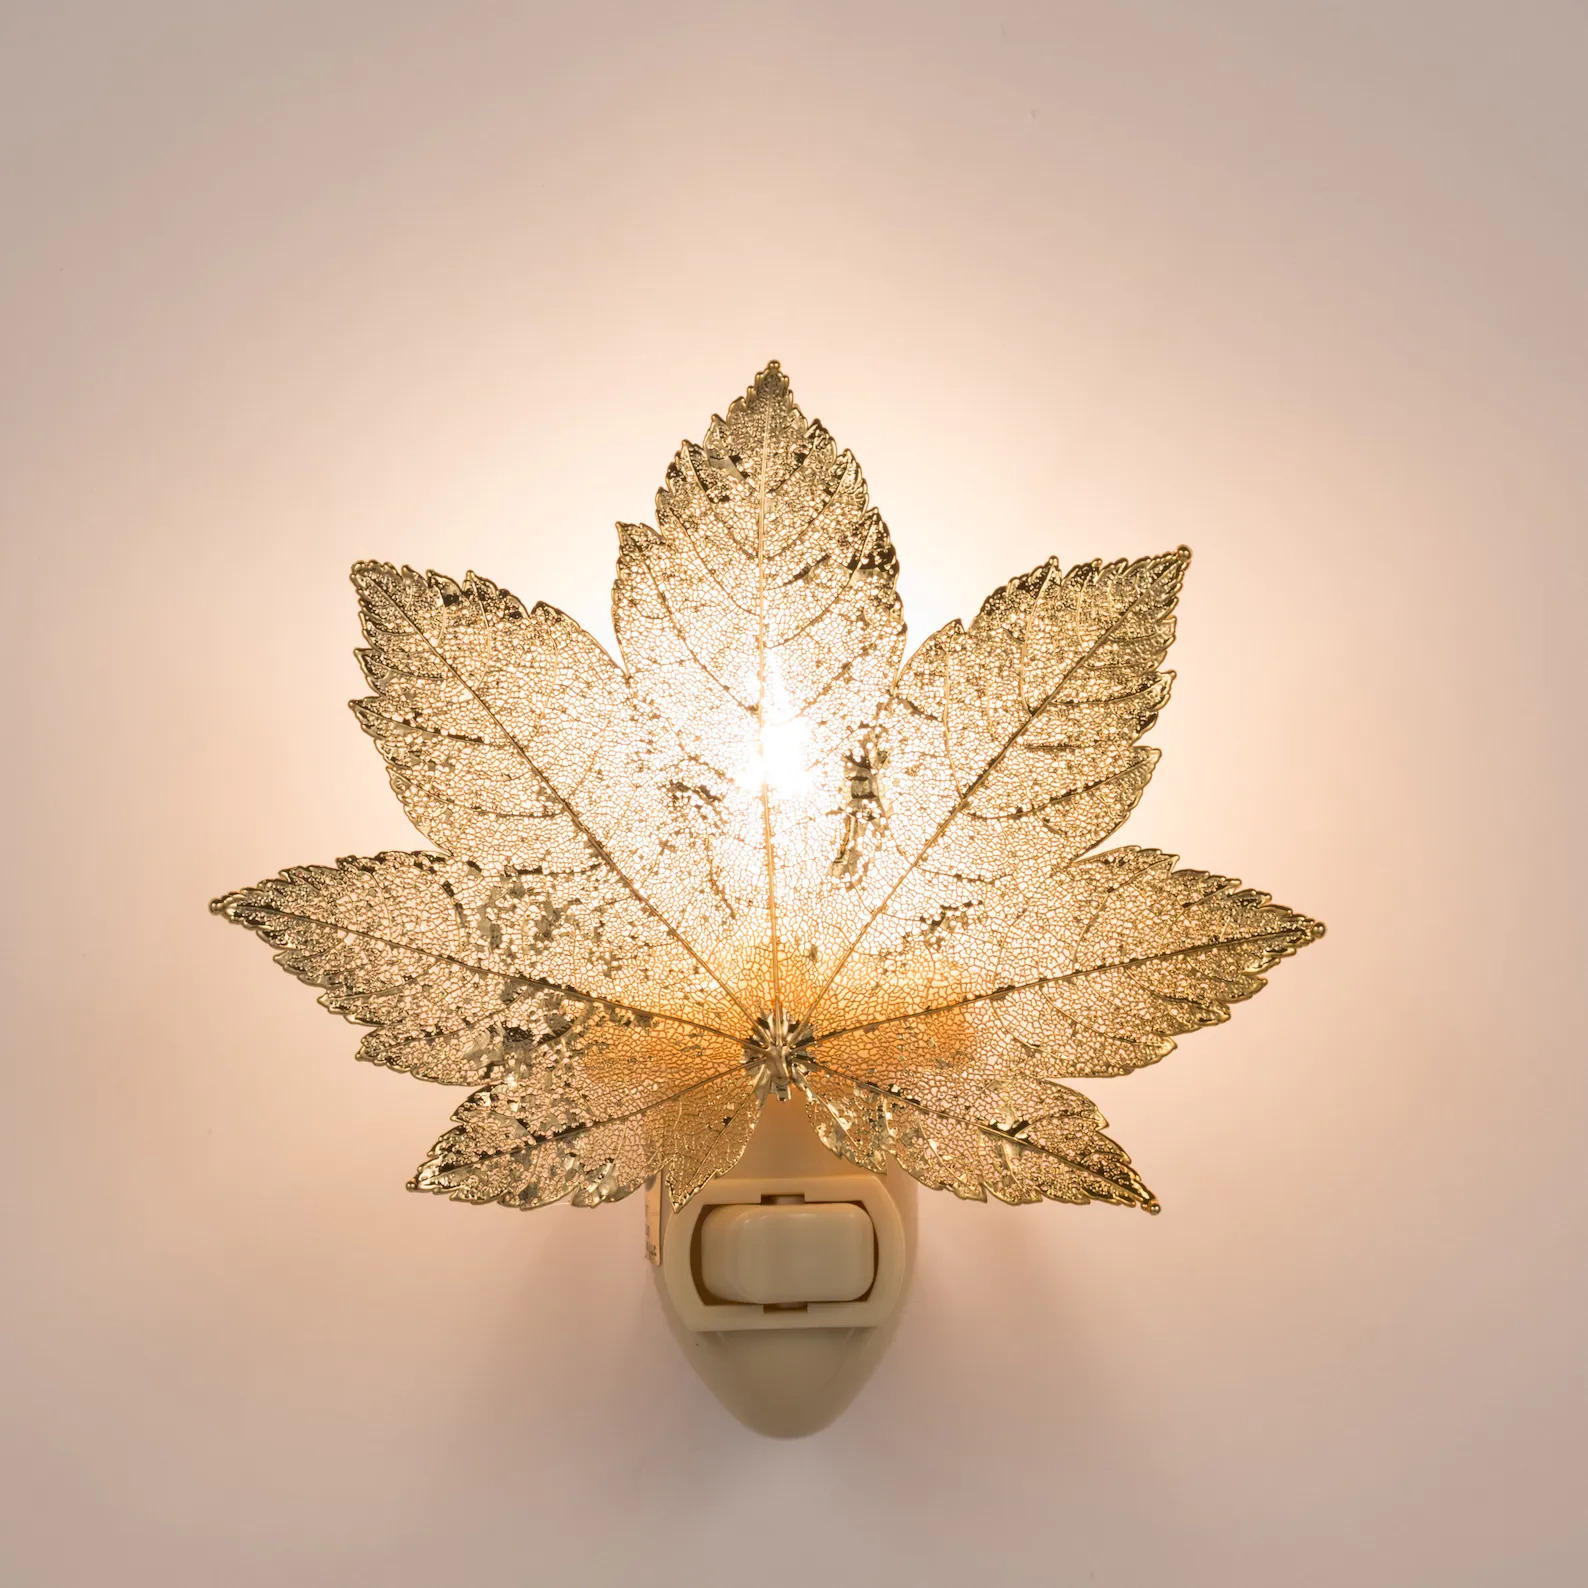 Night Time Magic: 18 Creative Night Light Designs to Transform Your Space